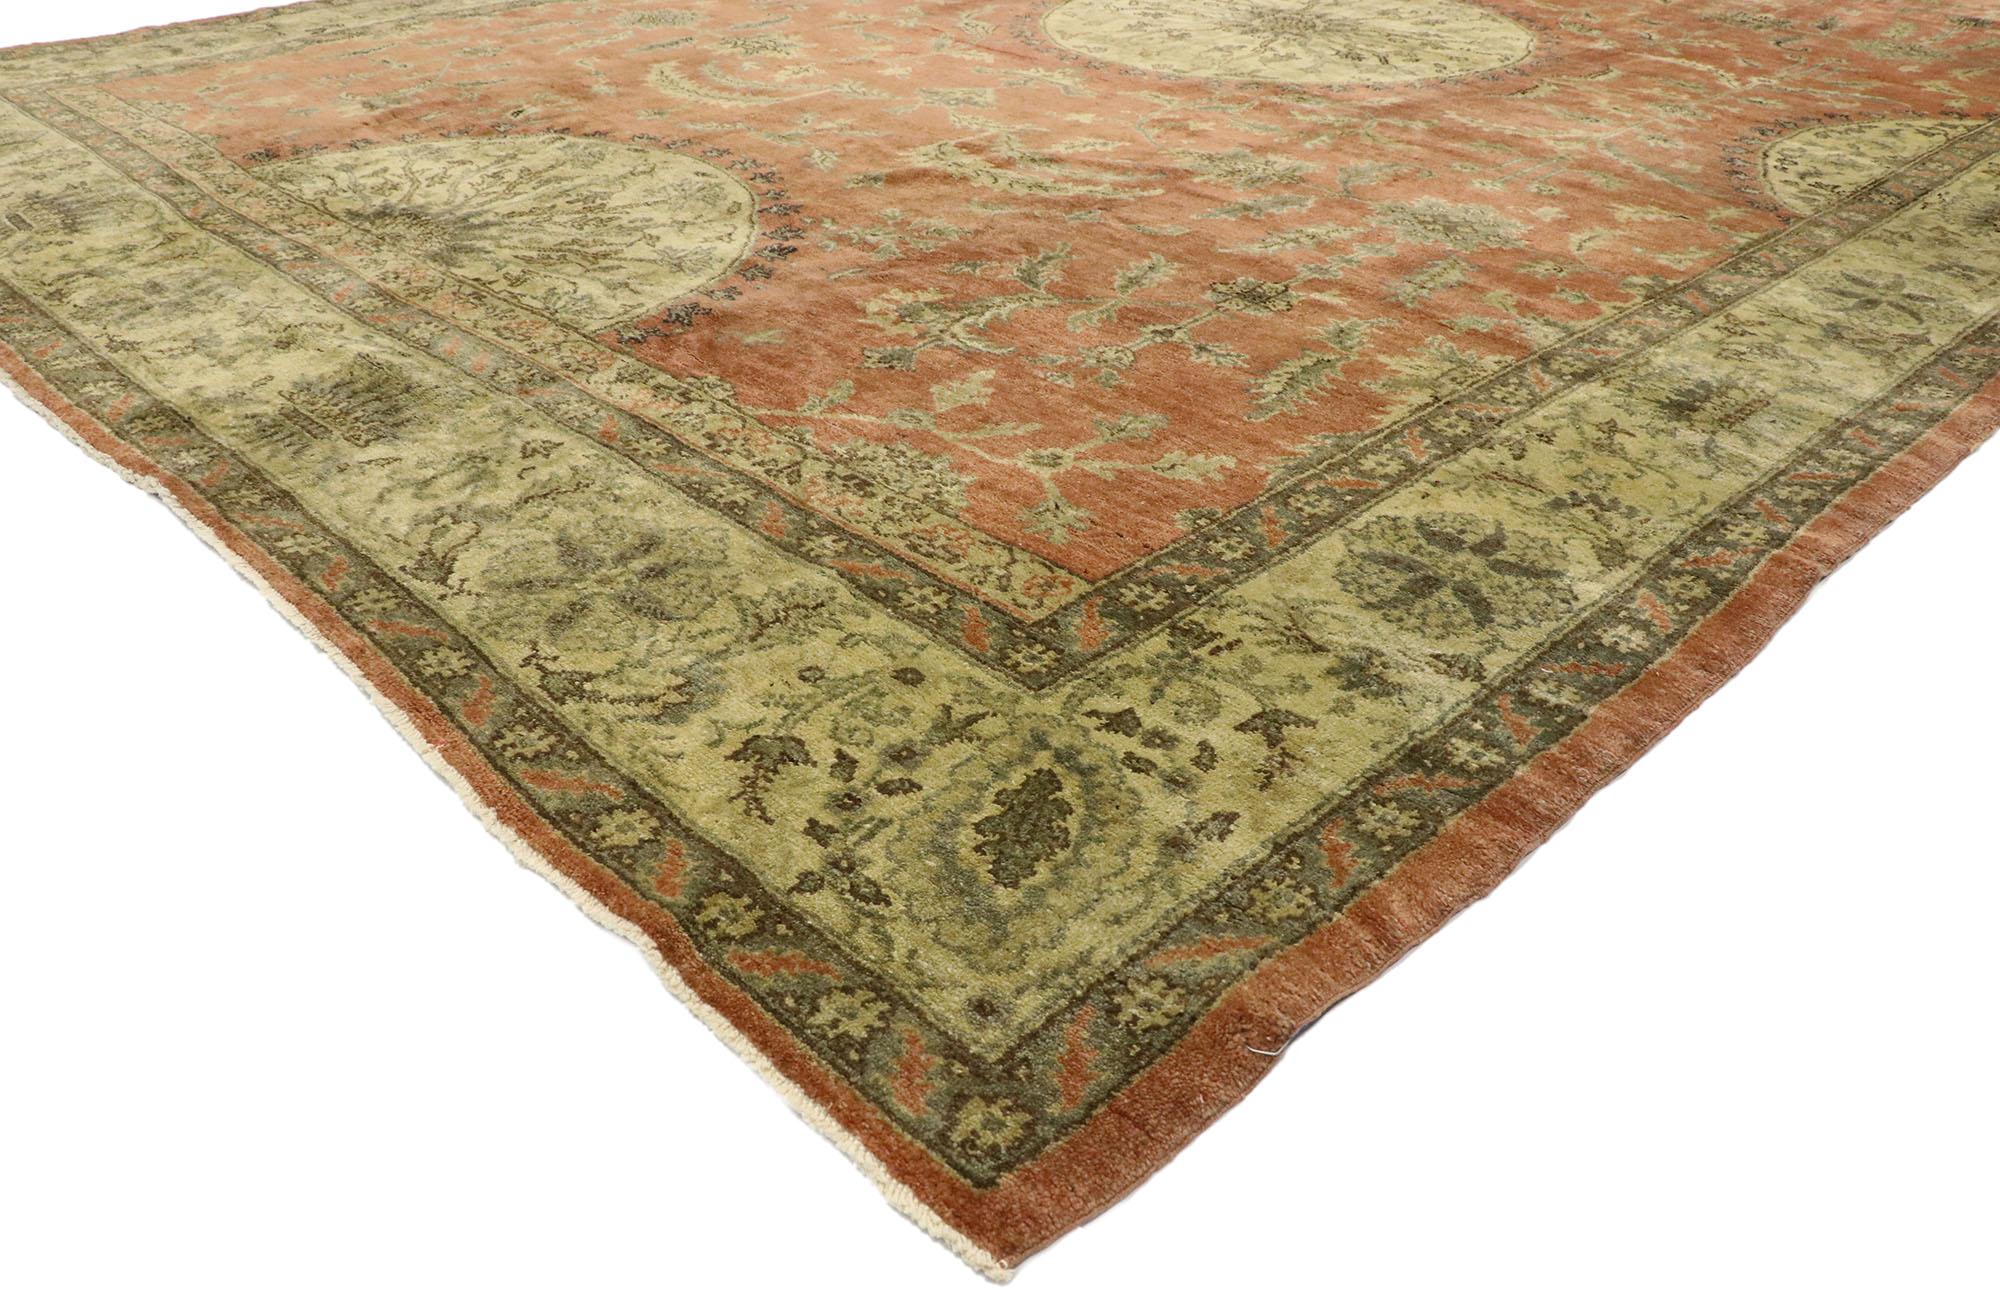 50499, distressed vintage Turkish Oushak rug with rustic English Manor style. M This hand knotted wool distressed vintage Turkish Oushak rug features a round central medallion surrounded with an all-over botanical pattern composed of curved sickle